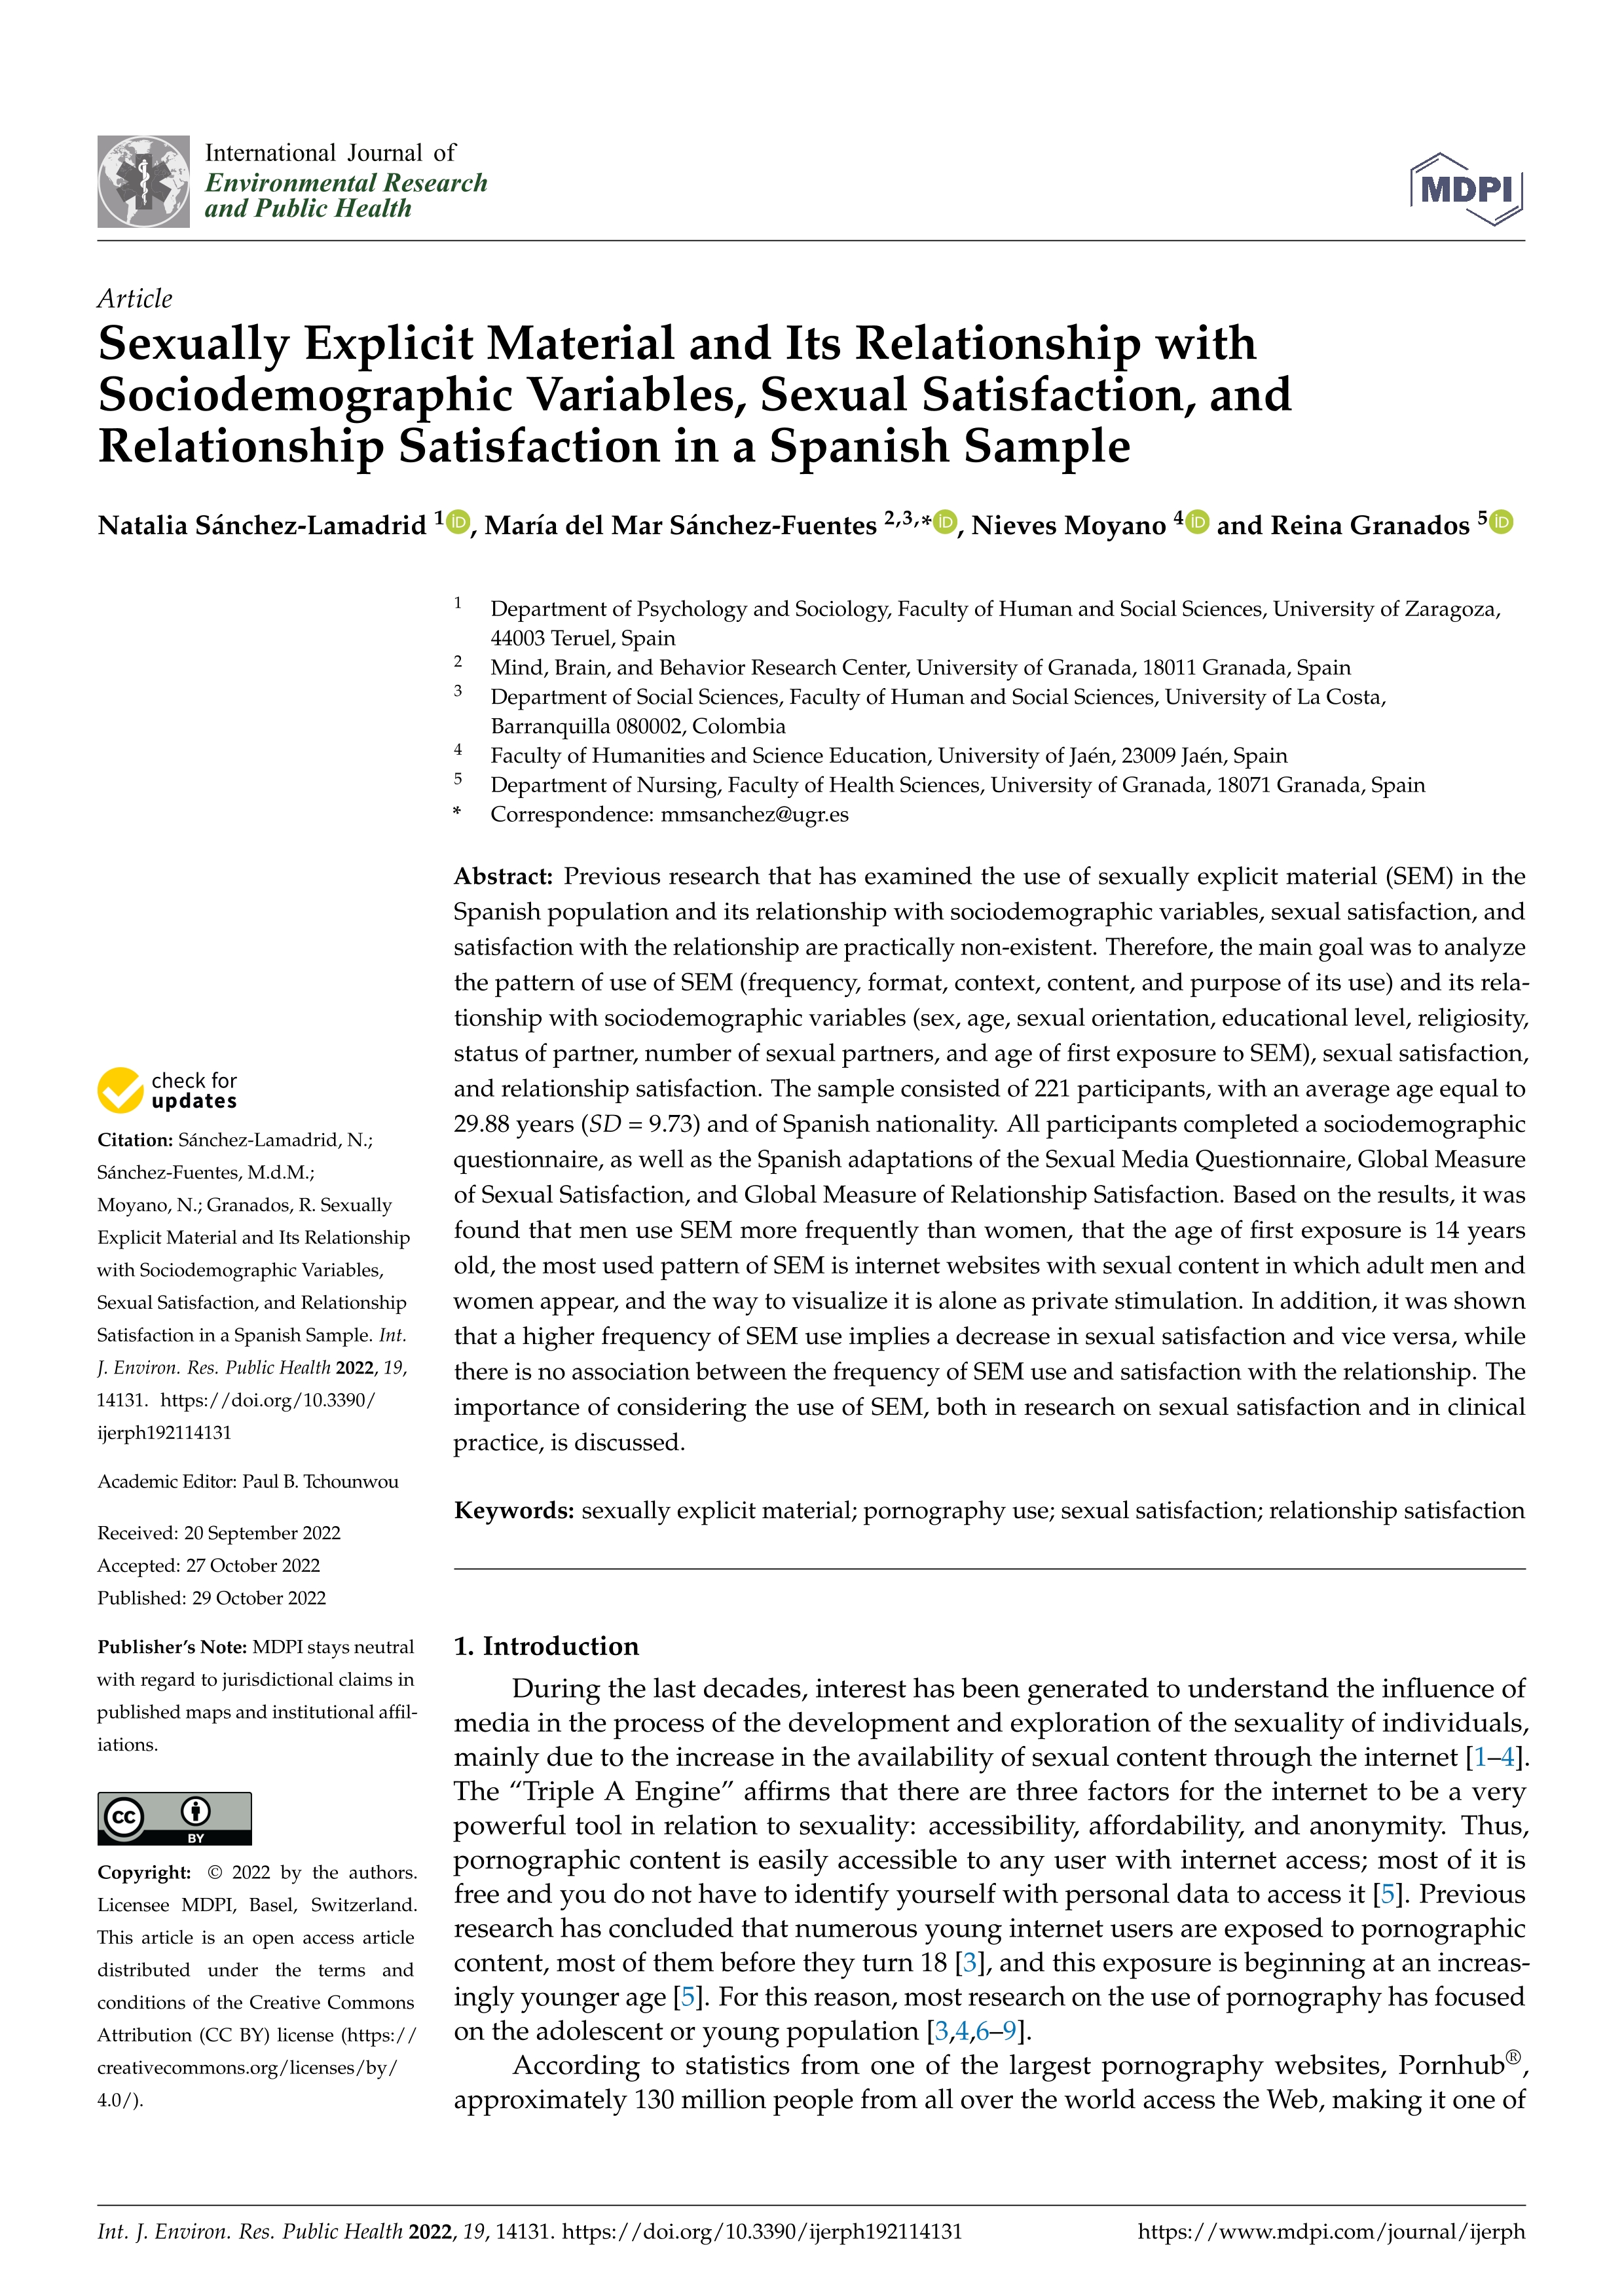 Sexually Explicit Material and Its Relationship with Sociodemographic Variables, Sexual Satisfaction, and Relationship Satisfaction in a Spanish Sample